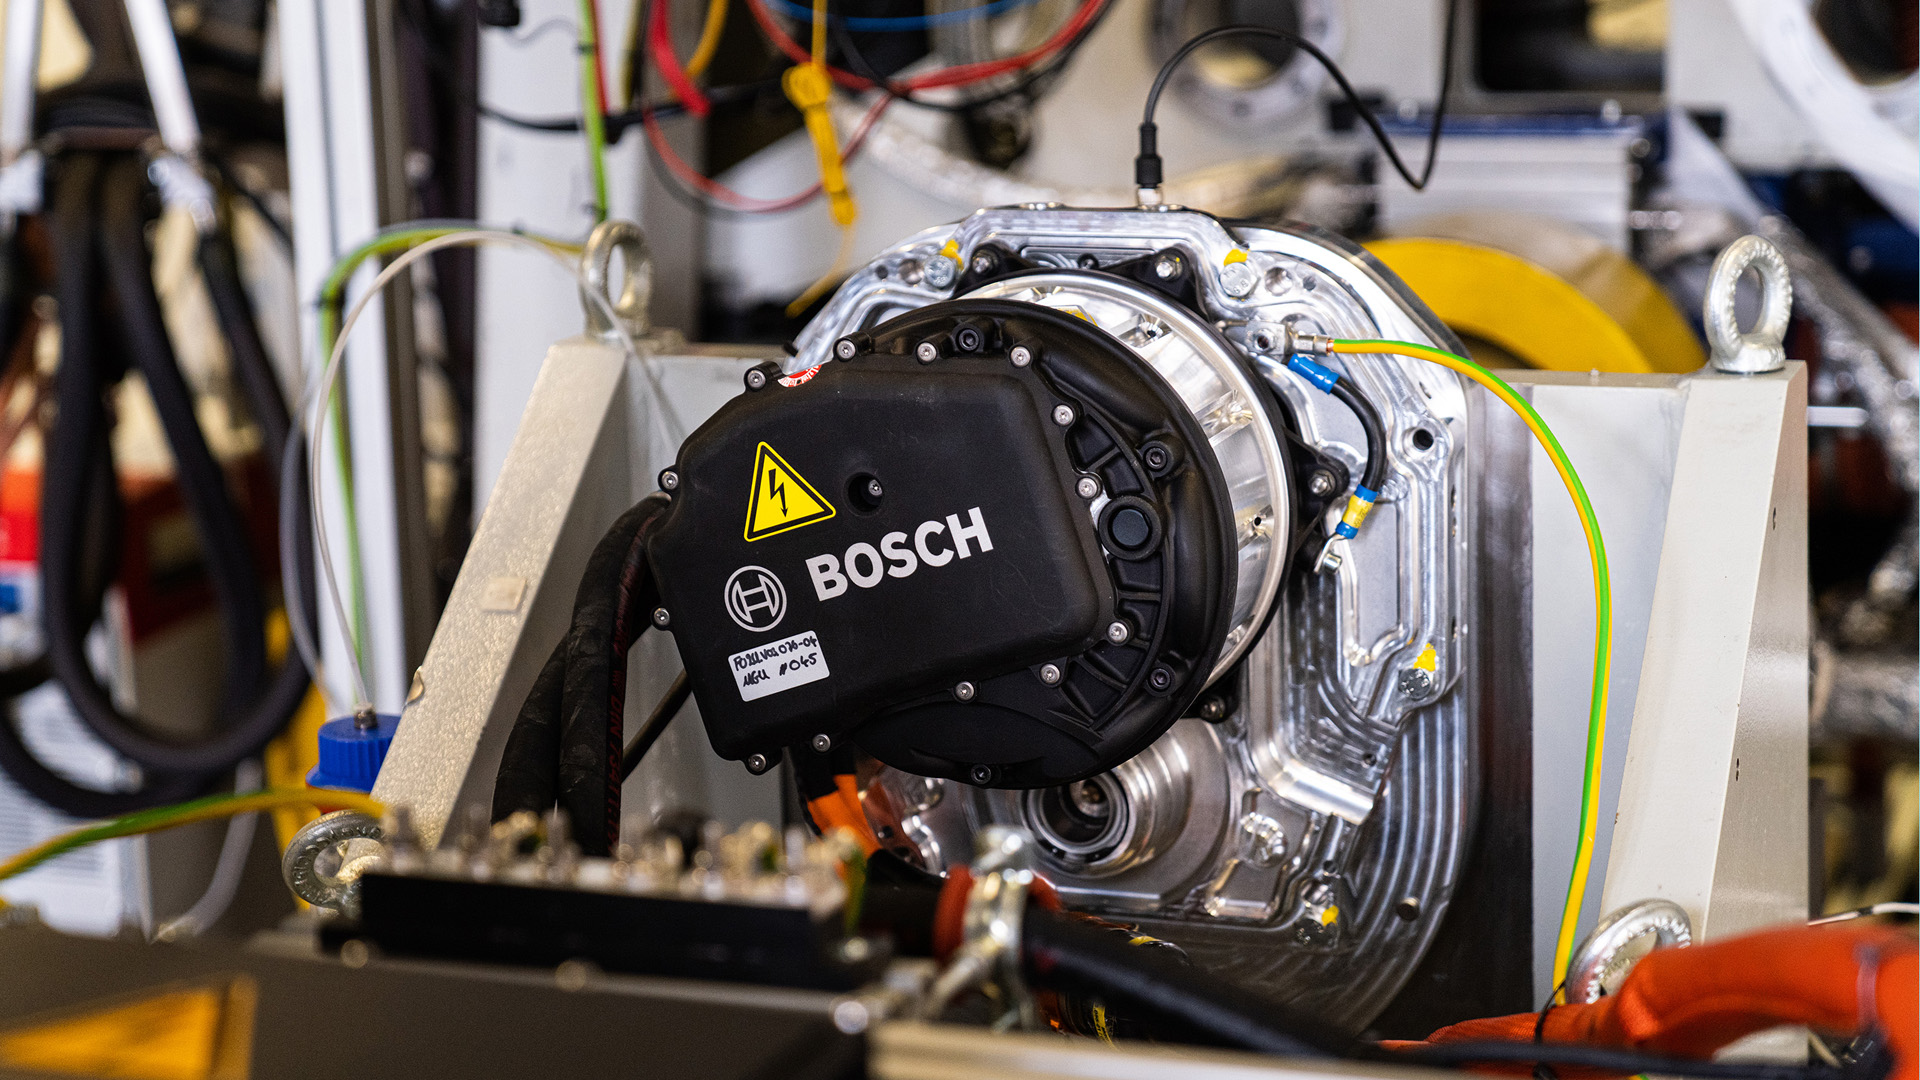 The electric motor (MGU) by Bosch for the LMDh prototypes provides up to 200 kW of power for high performance and reliability.